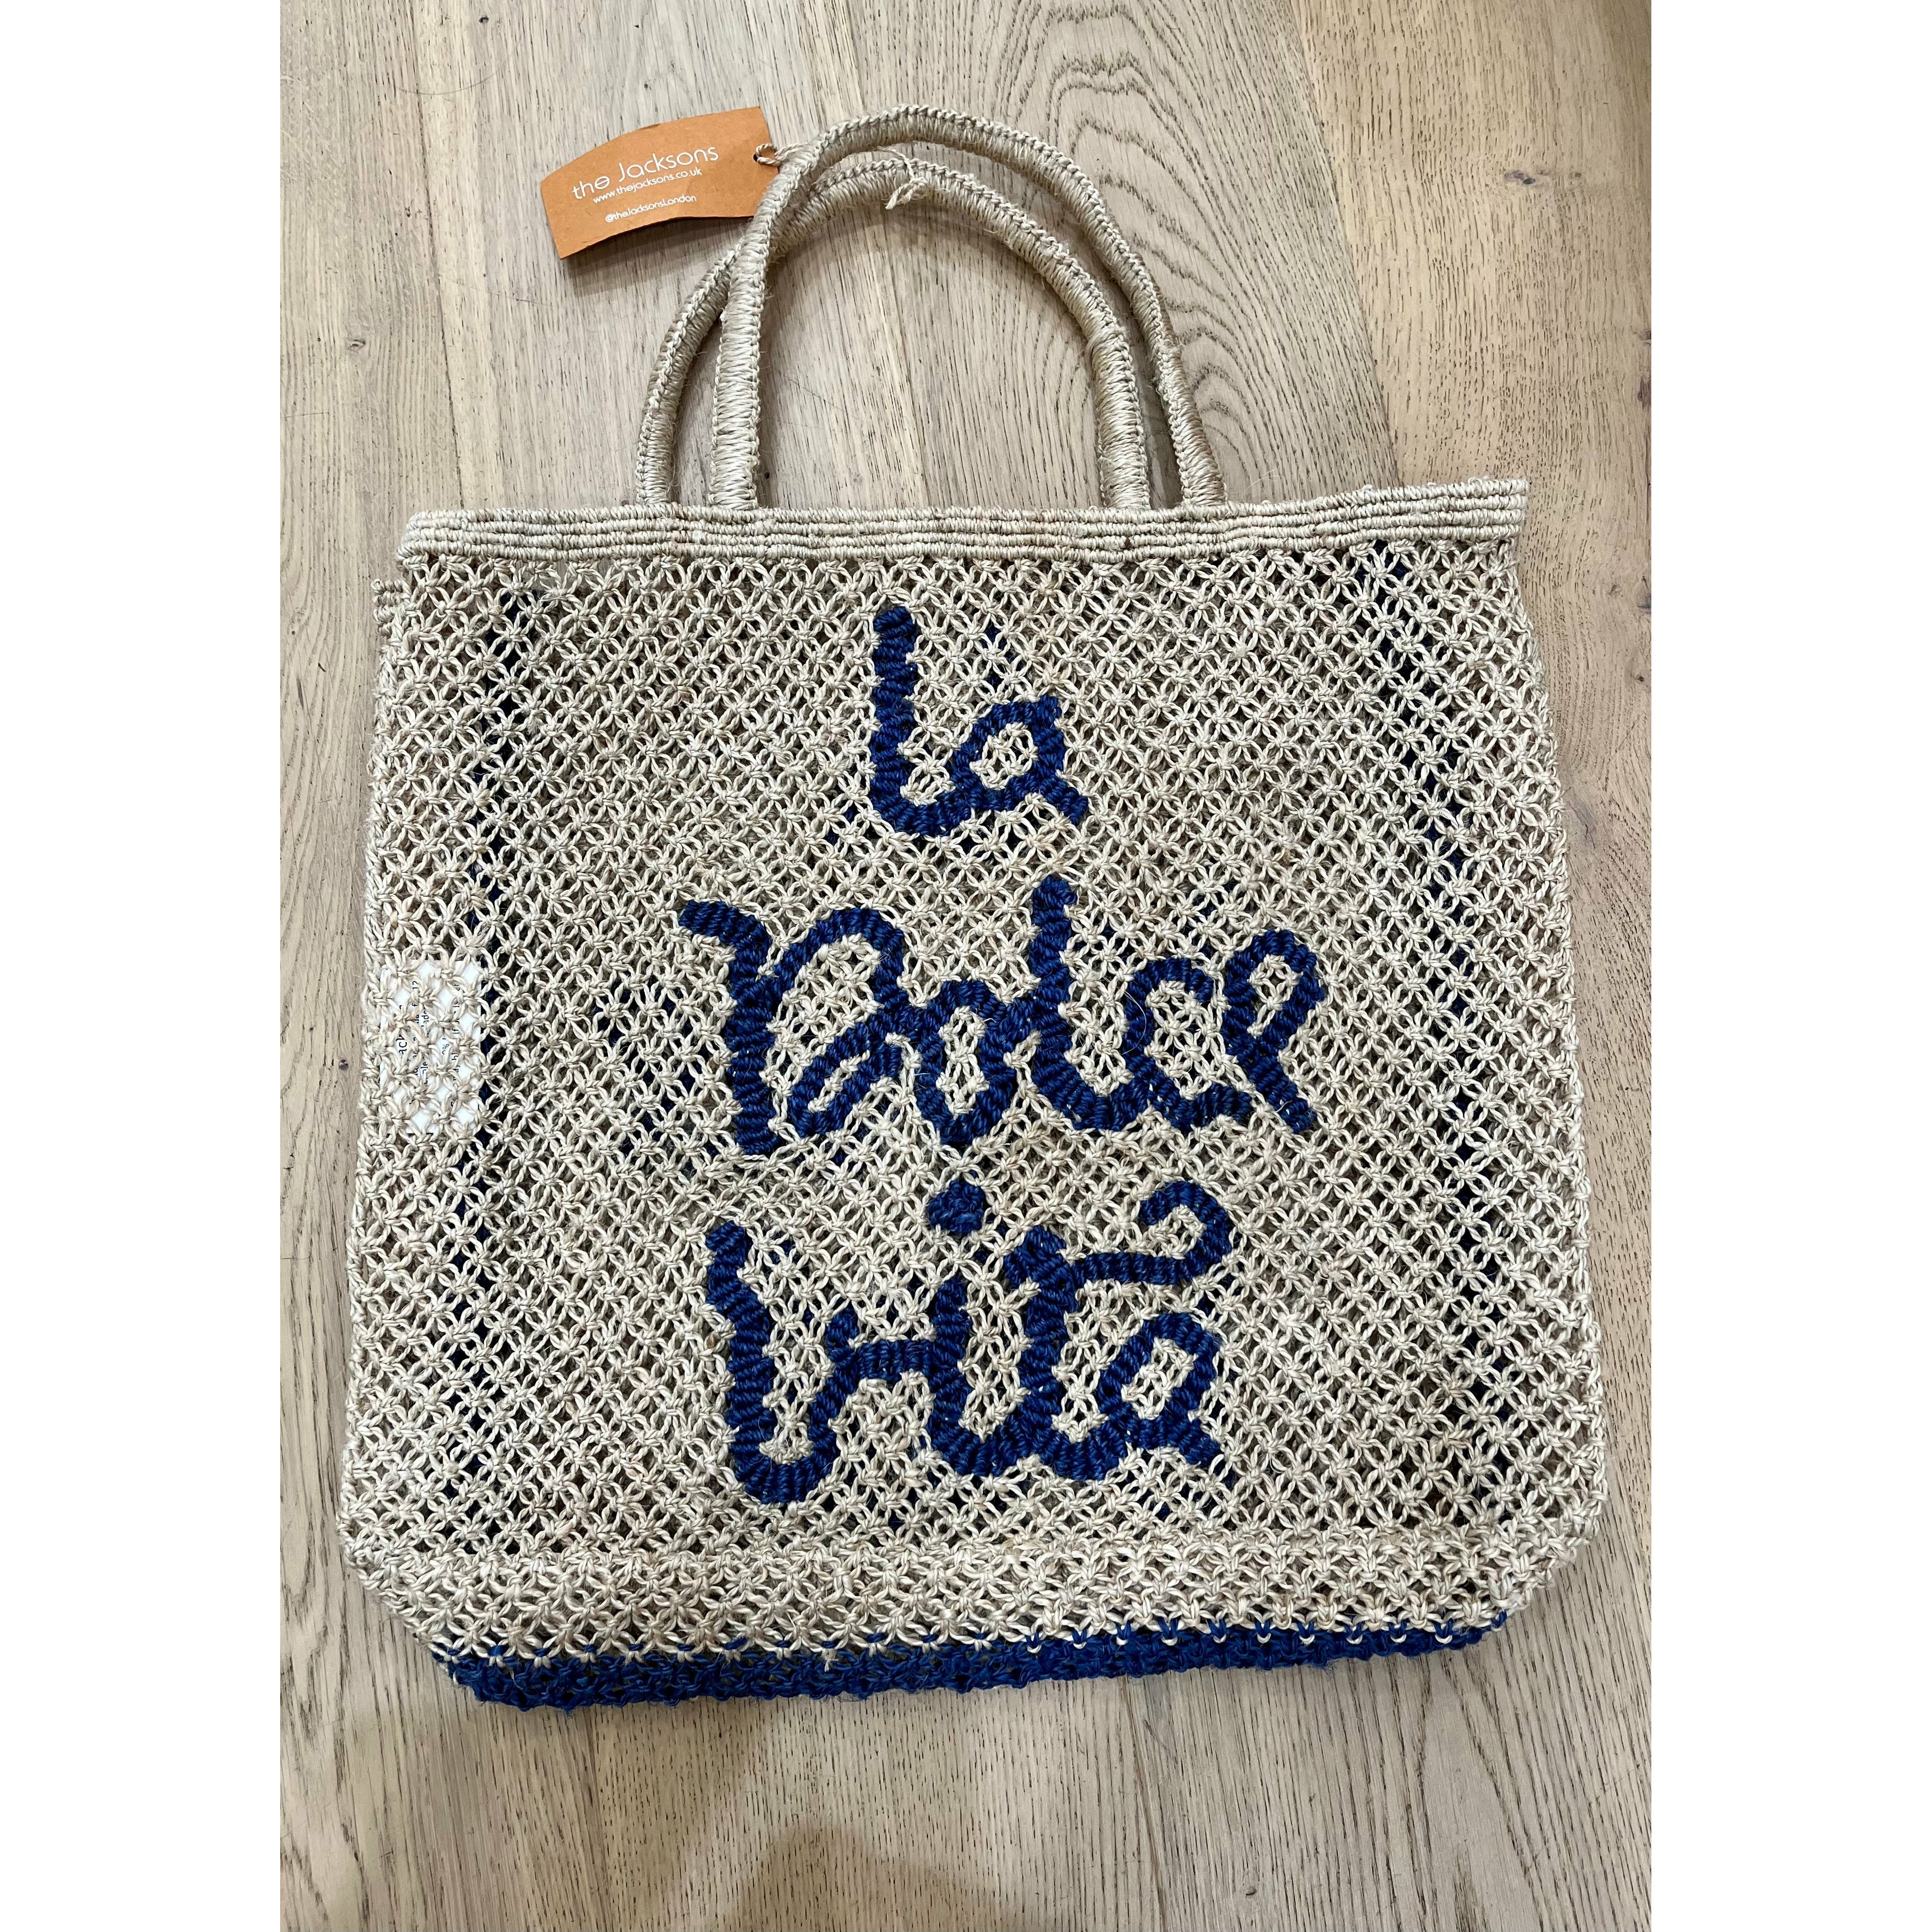 Buon Giorno Bag in Natural, Indigo and Cobalt, from The Jacksons